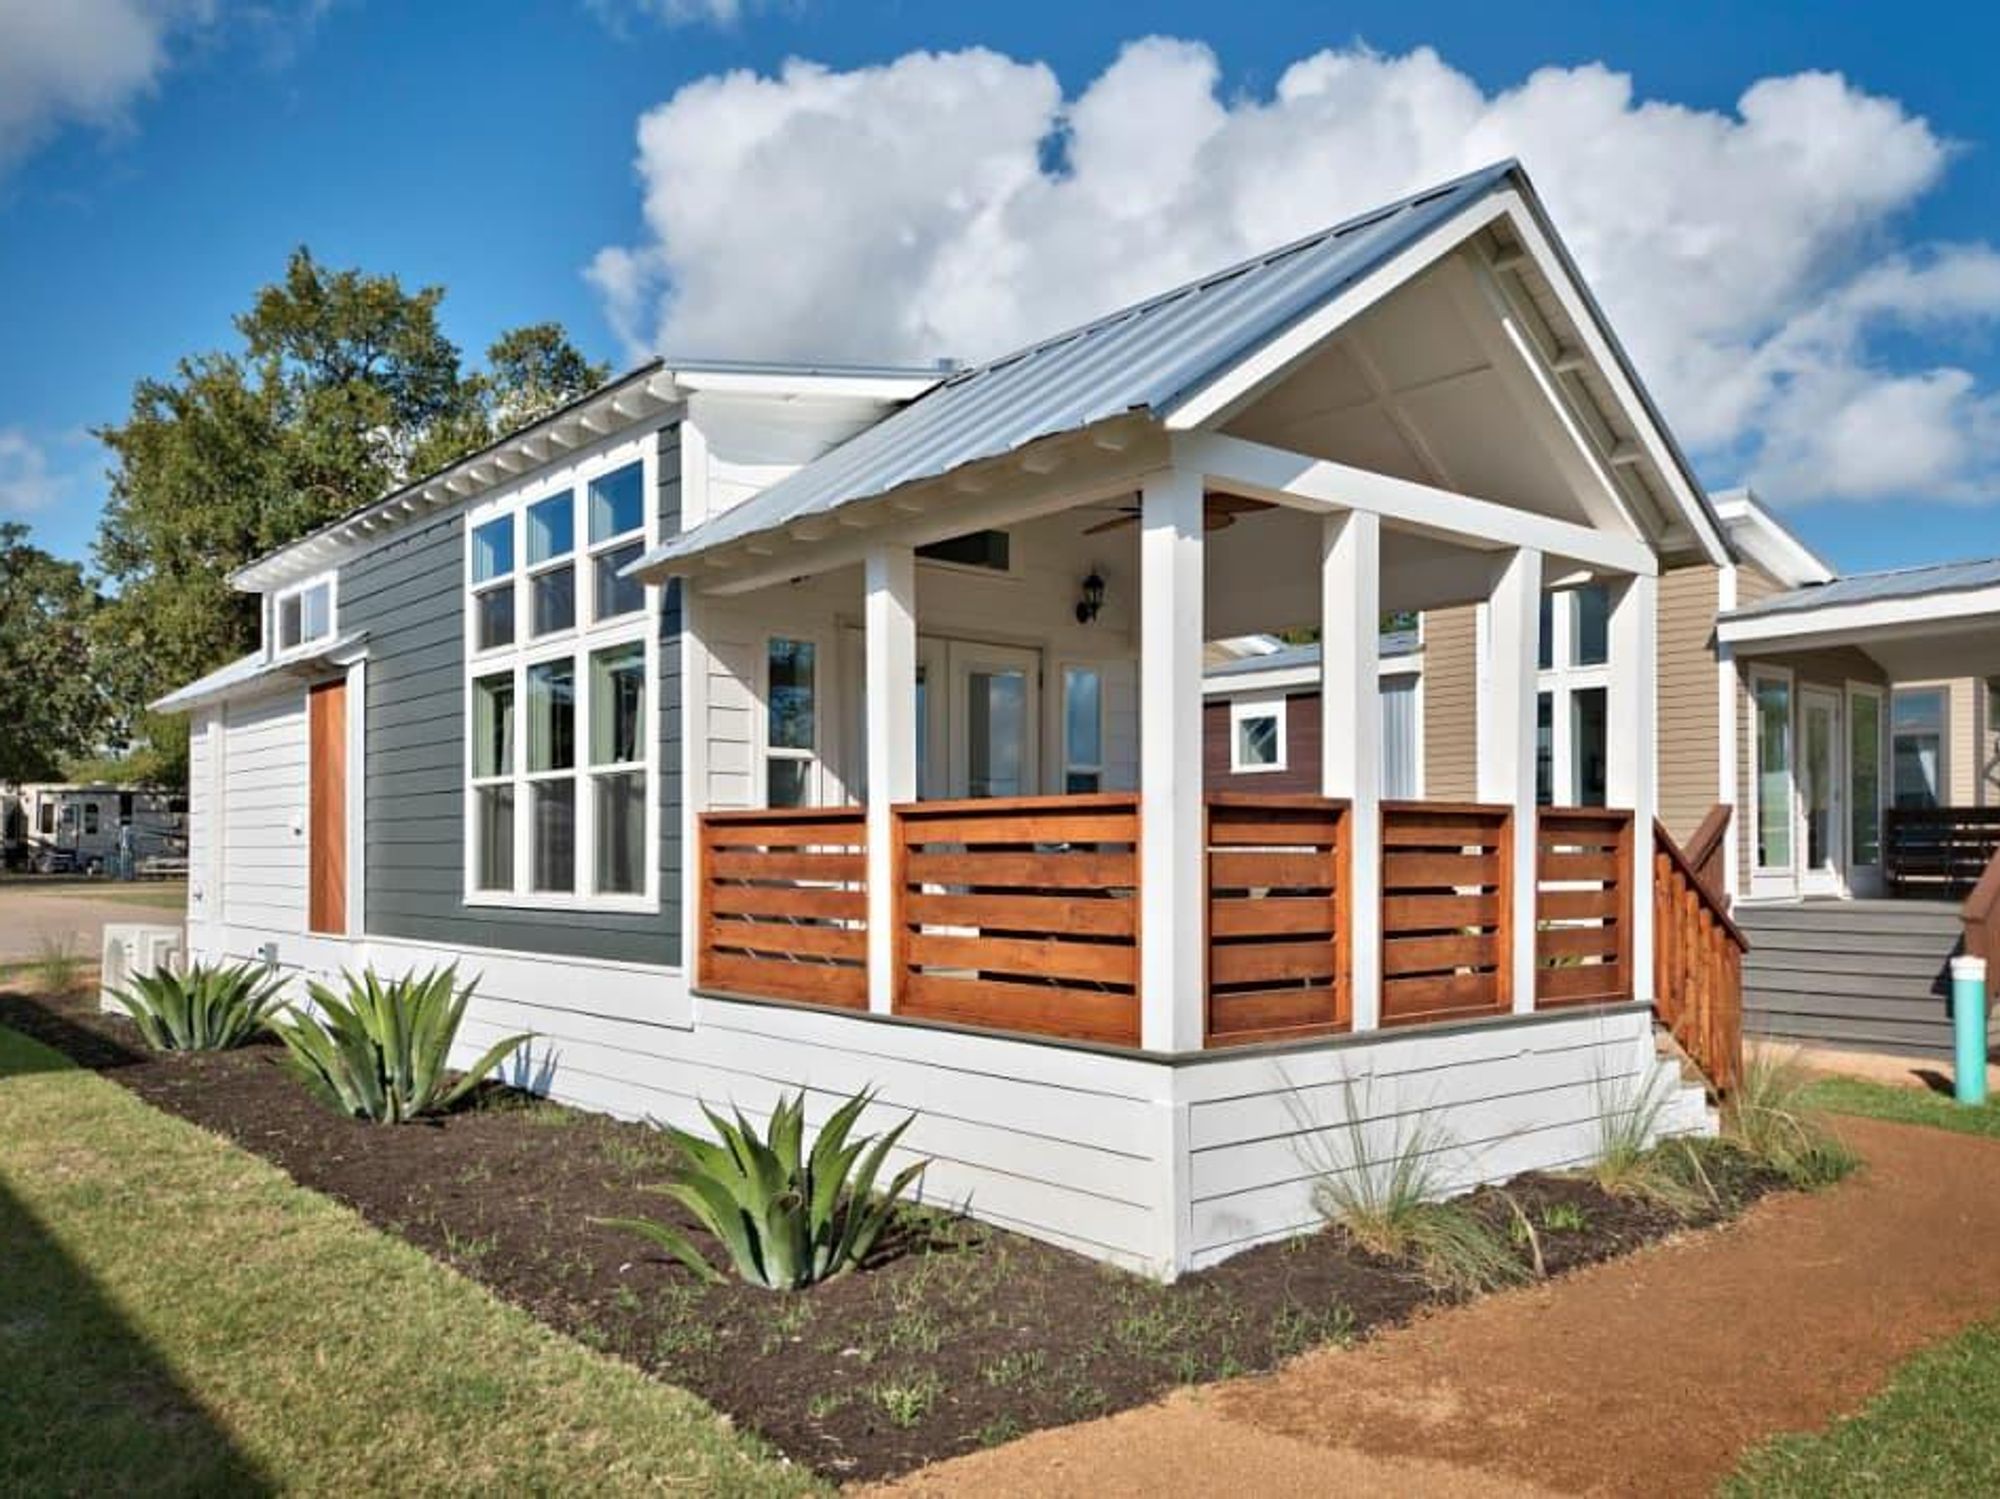 Tiny Houses For Sale In Austin - Tiny Houses For Sale, Rent and Builders:  Tiny House Listings - Tiny House Listings